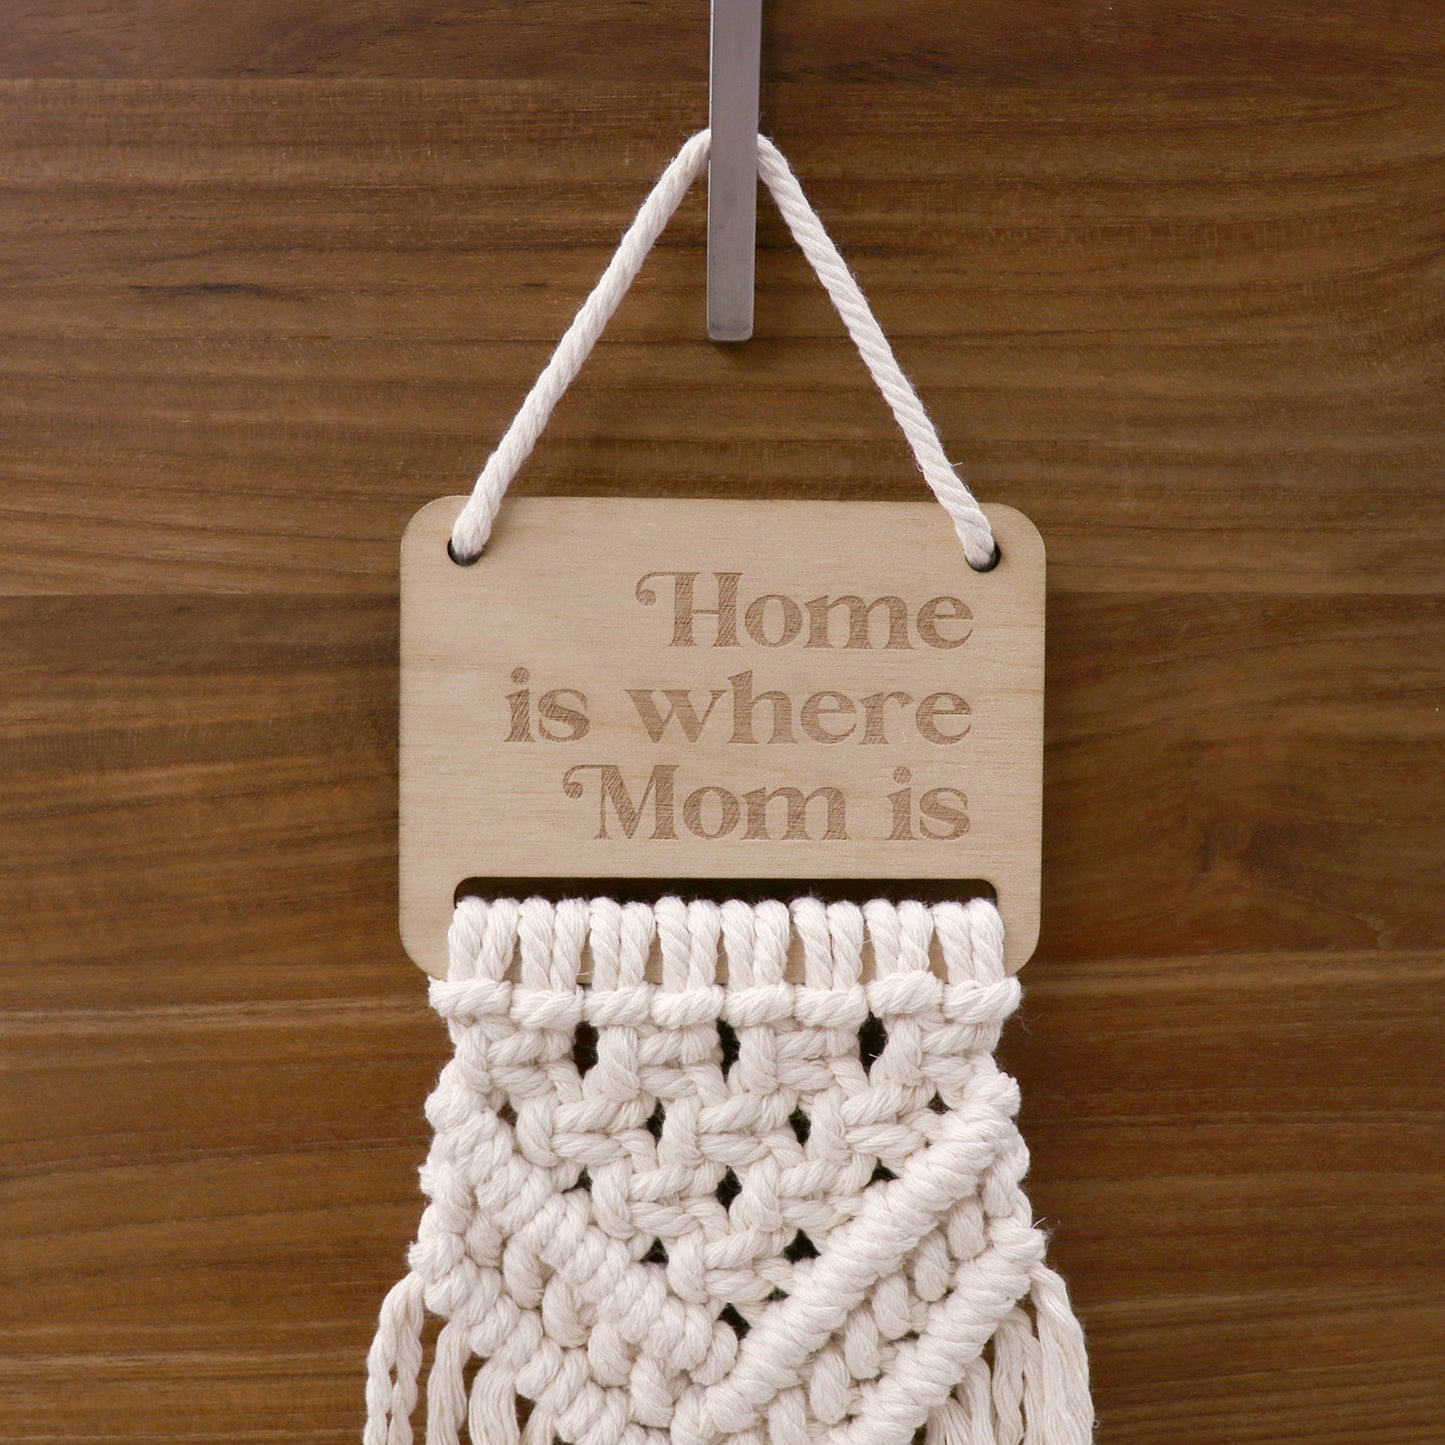 Mom Macrame Wall Hanging Quote